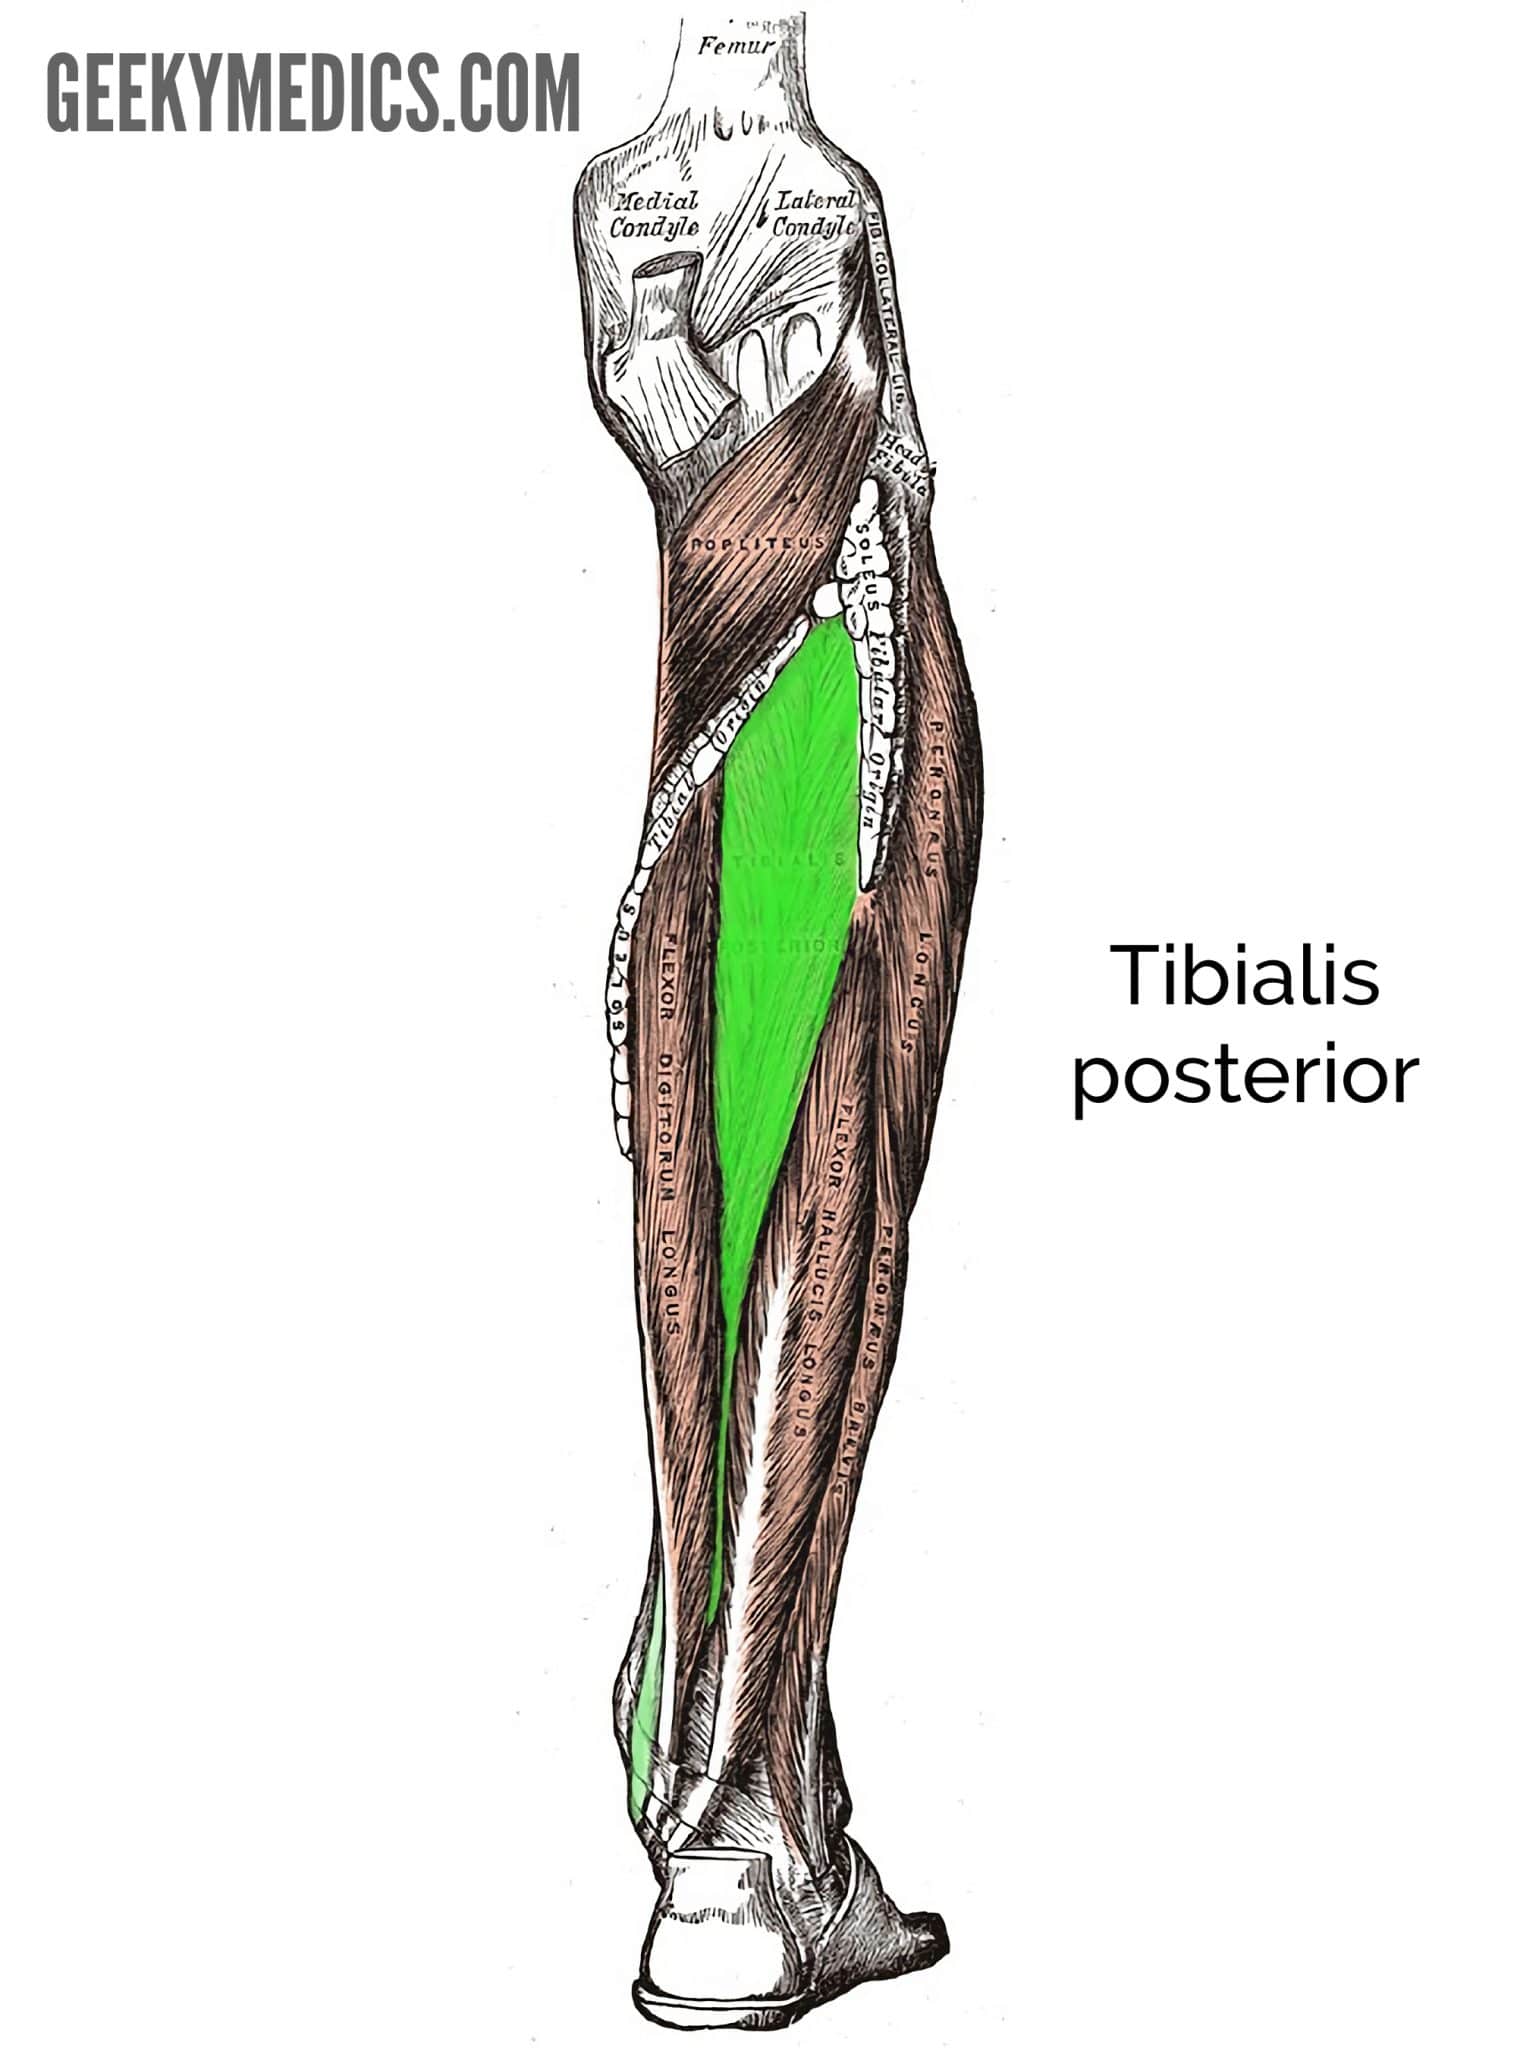 Muscles of the Lower Leg, Anatomy